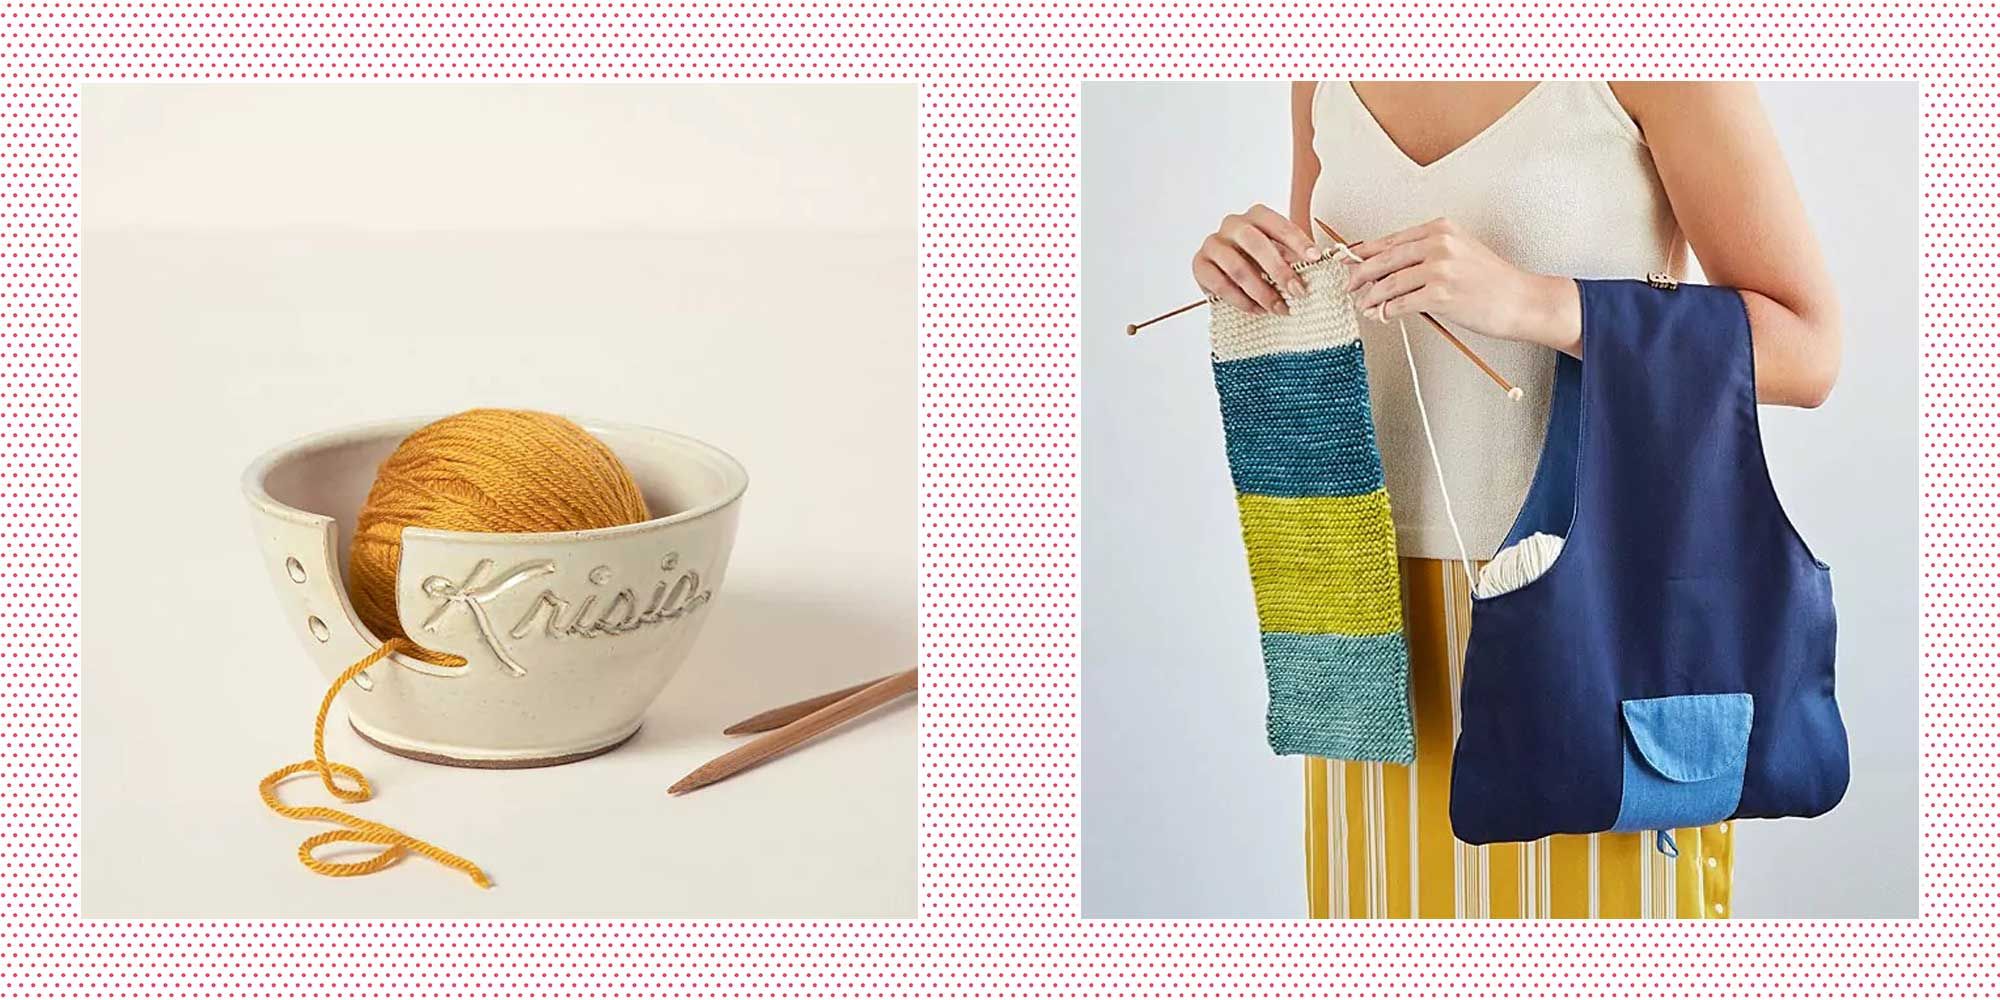 20 Best Gifts for Knitters - Knitting Gift Ideas for Beginners and Advanced  Knitters